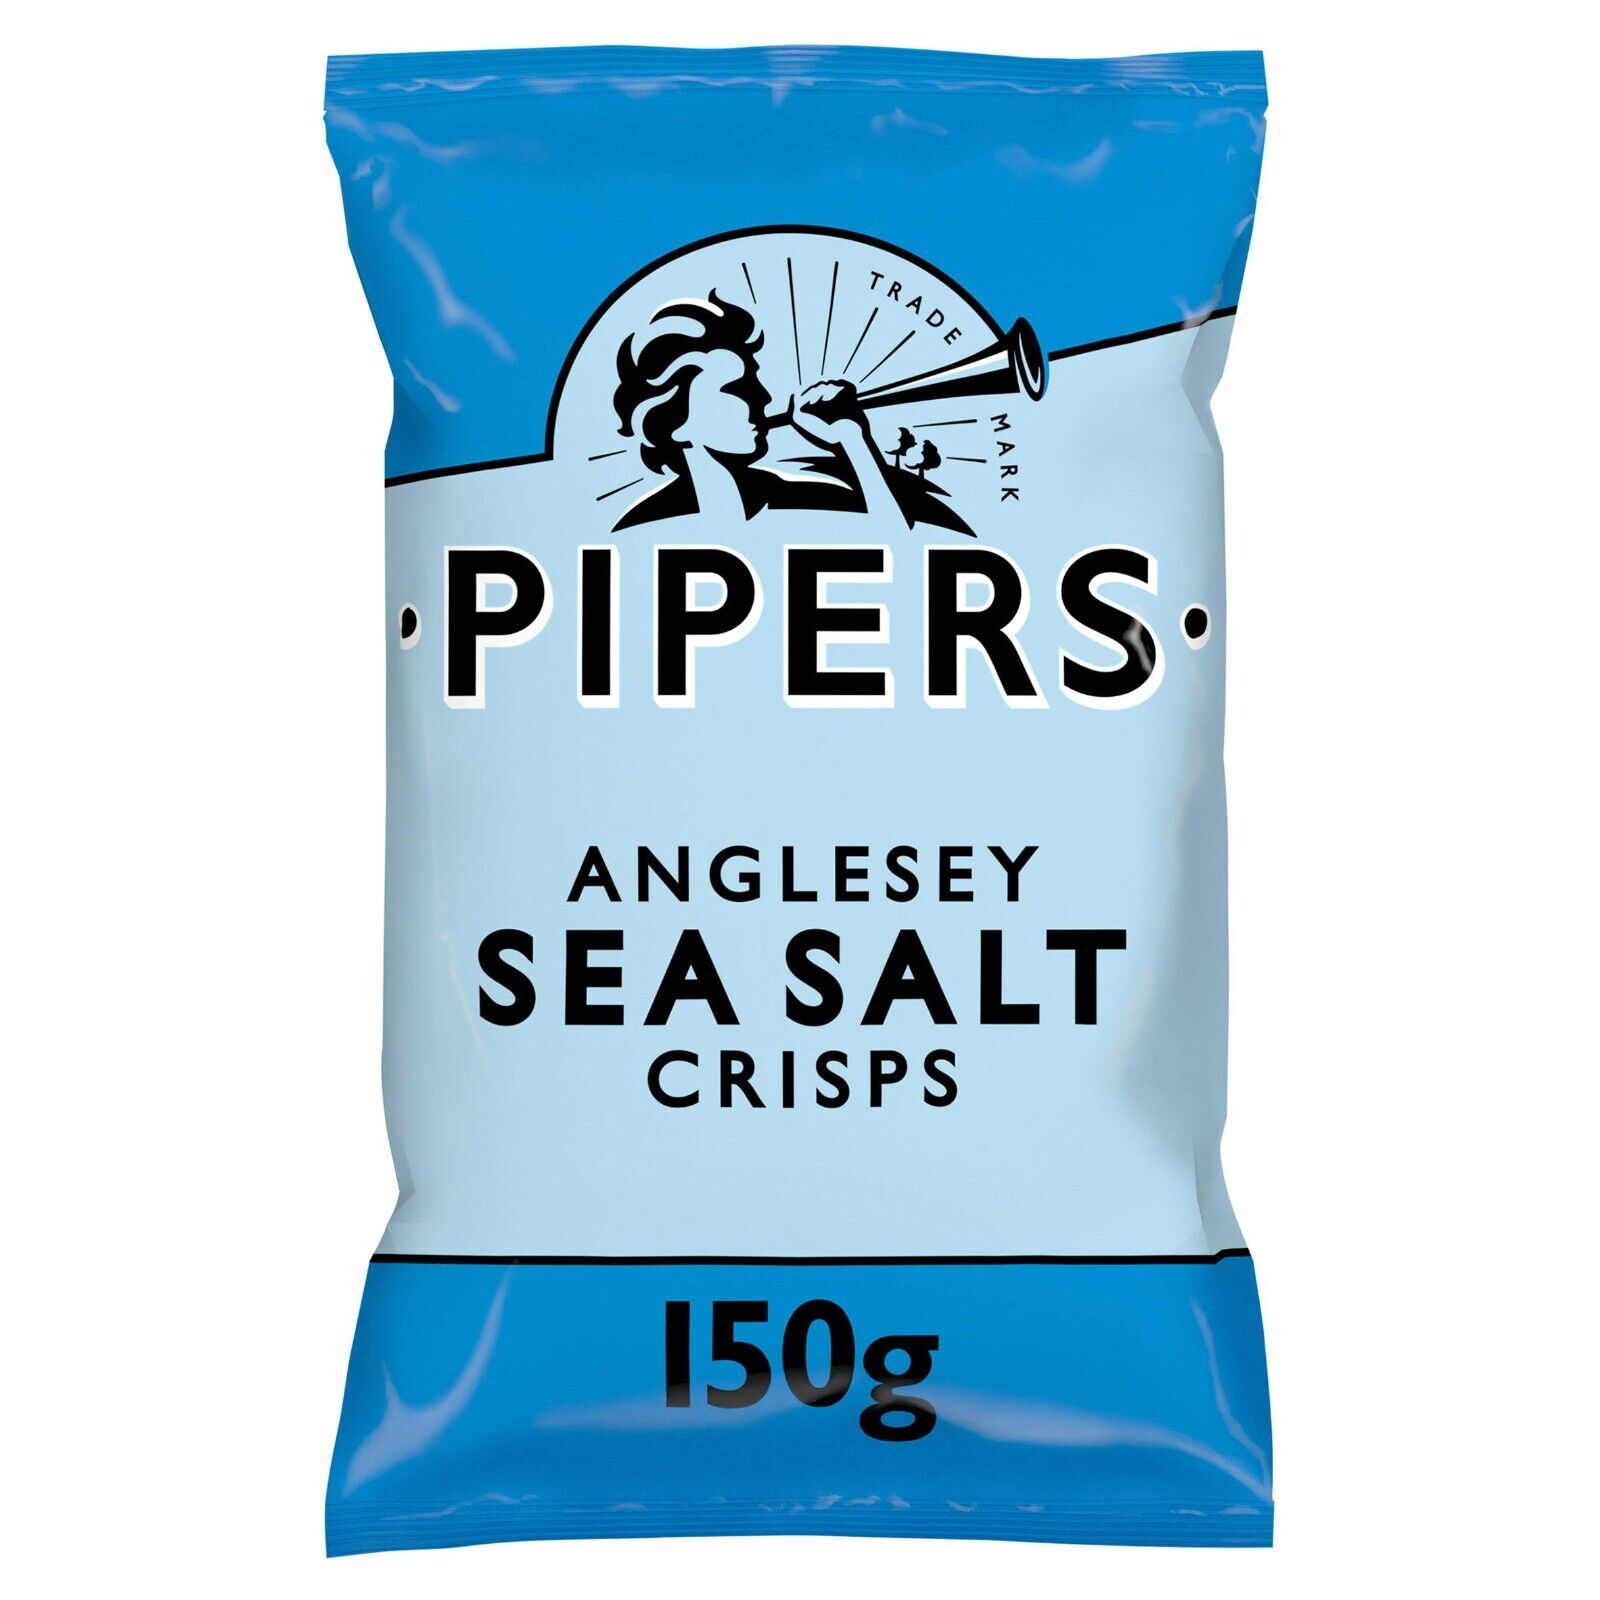 PIPERS ANGLESEY SALT 150G X 15